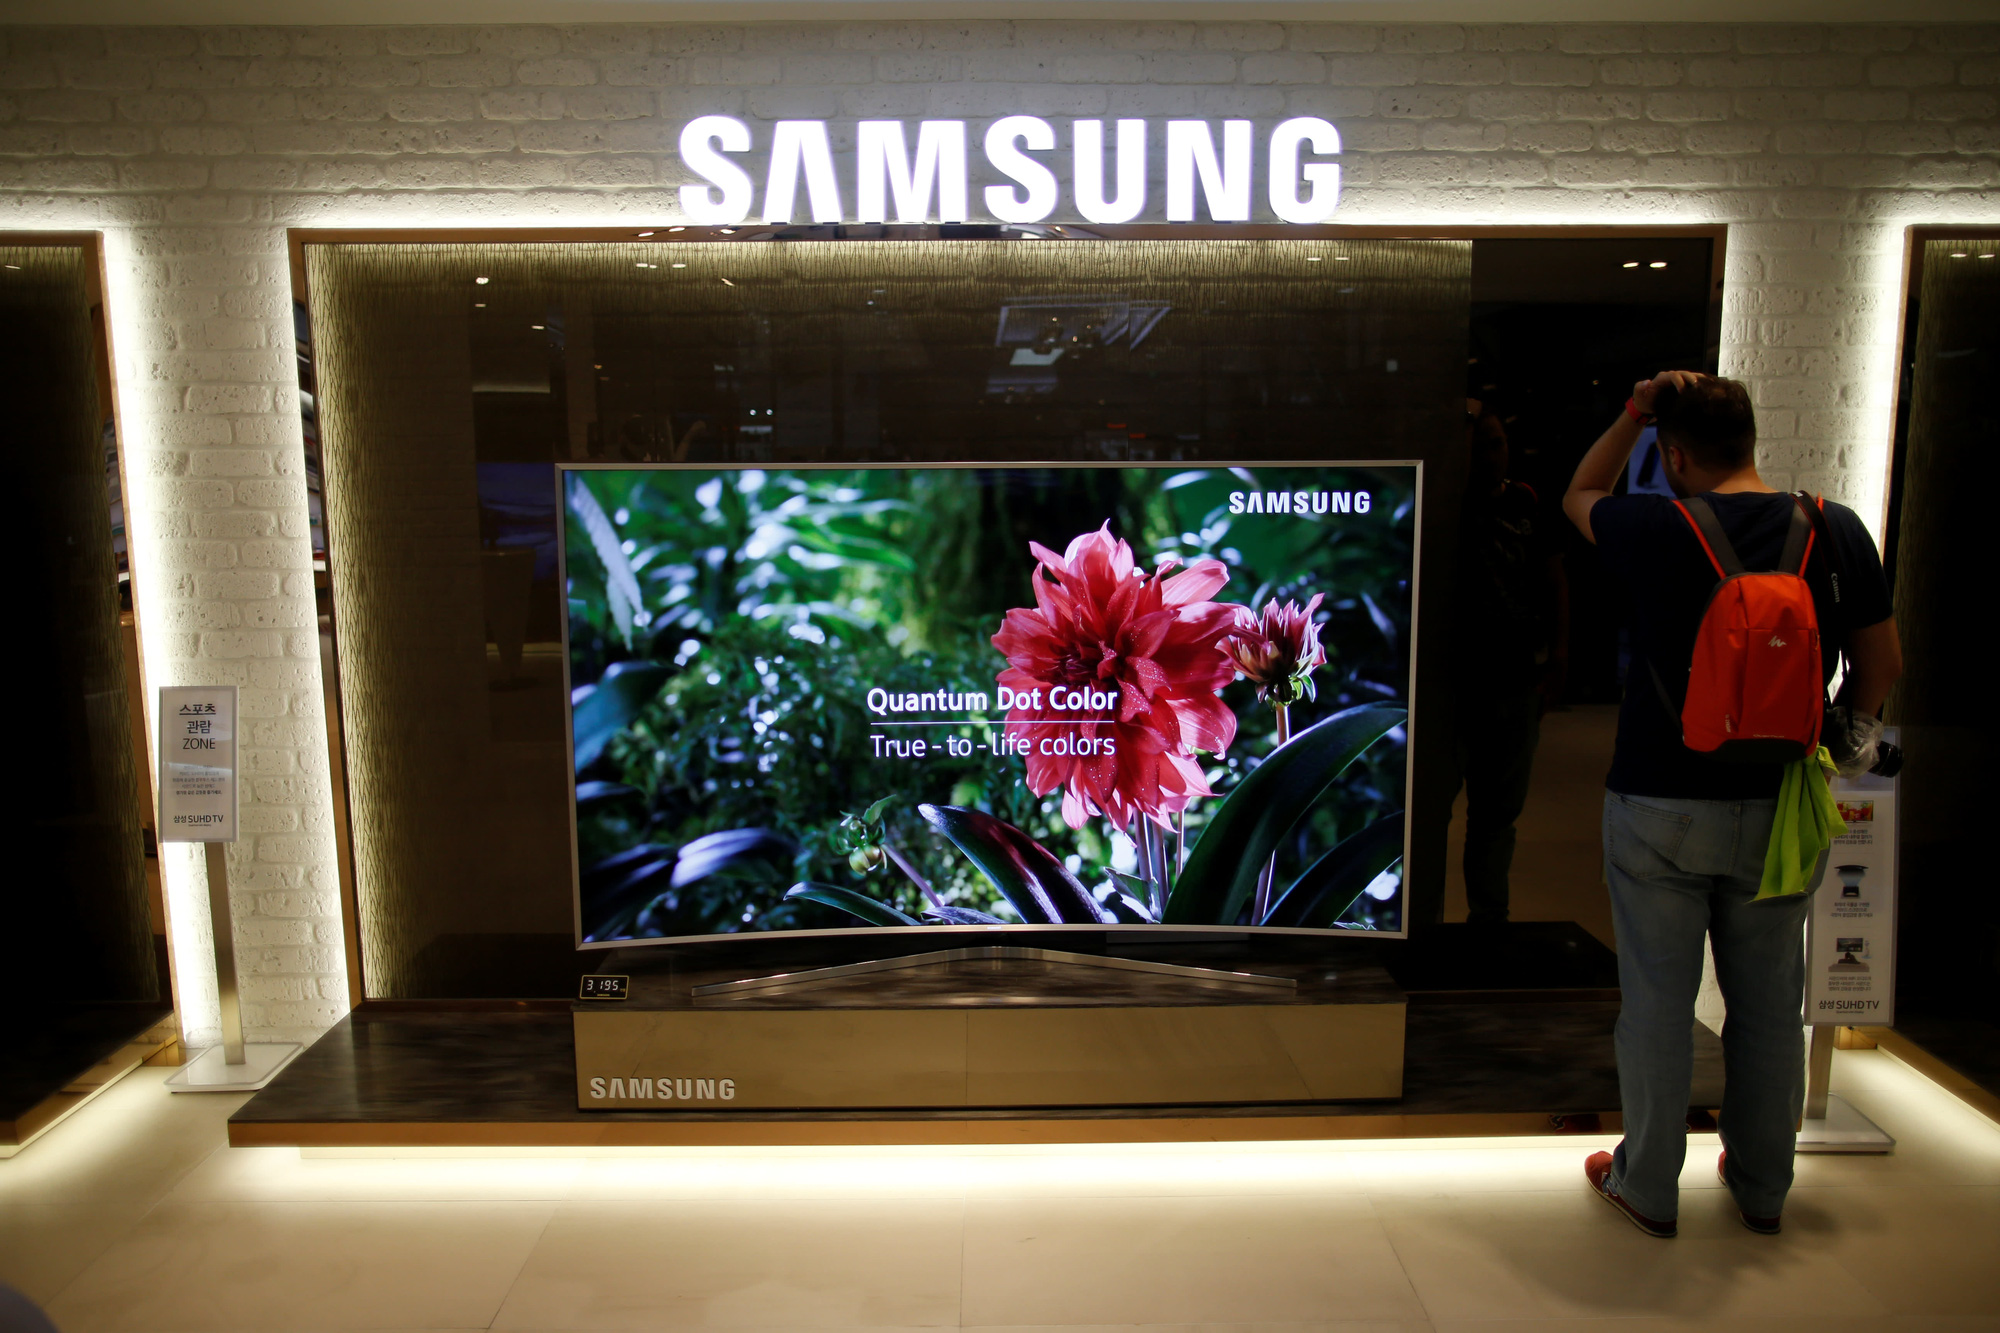 Samsung to relocate parts of TV production to Vietnam: media